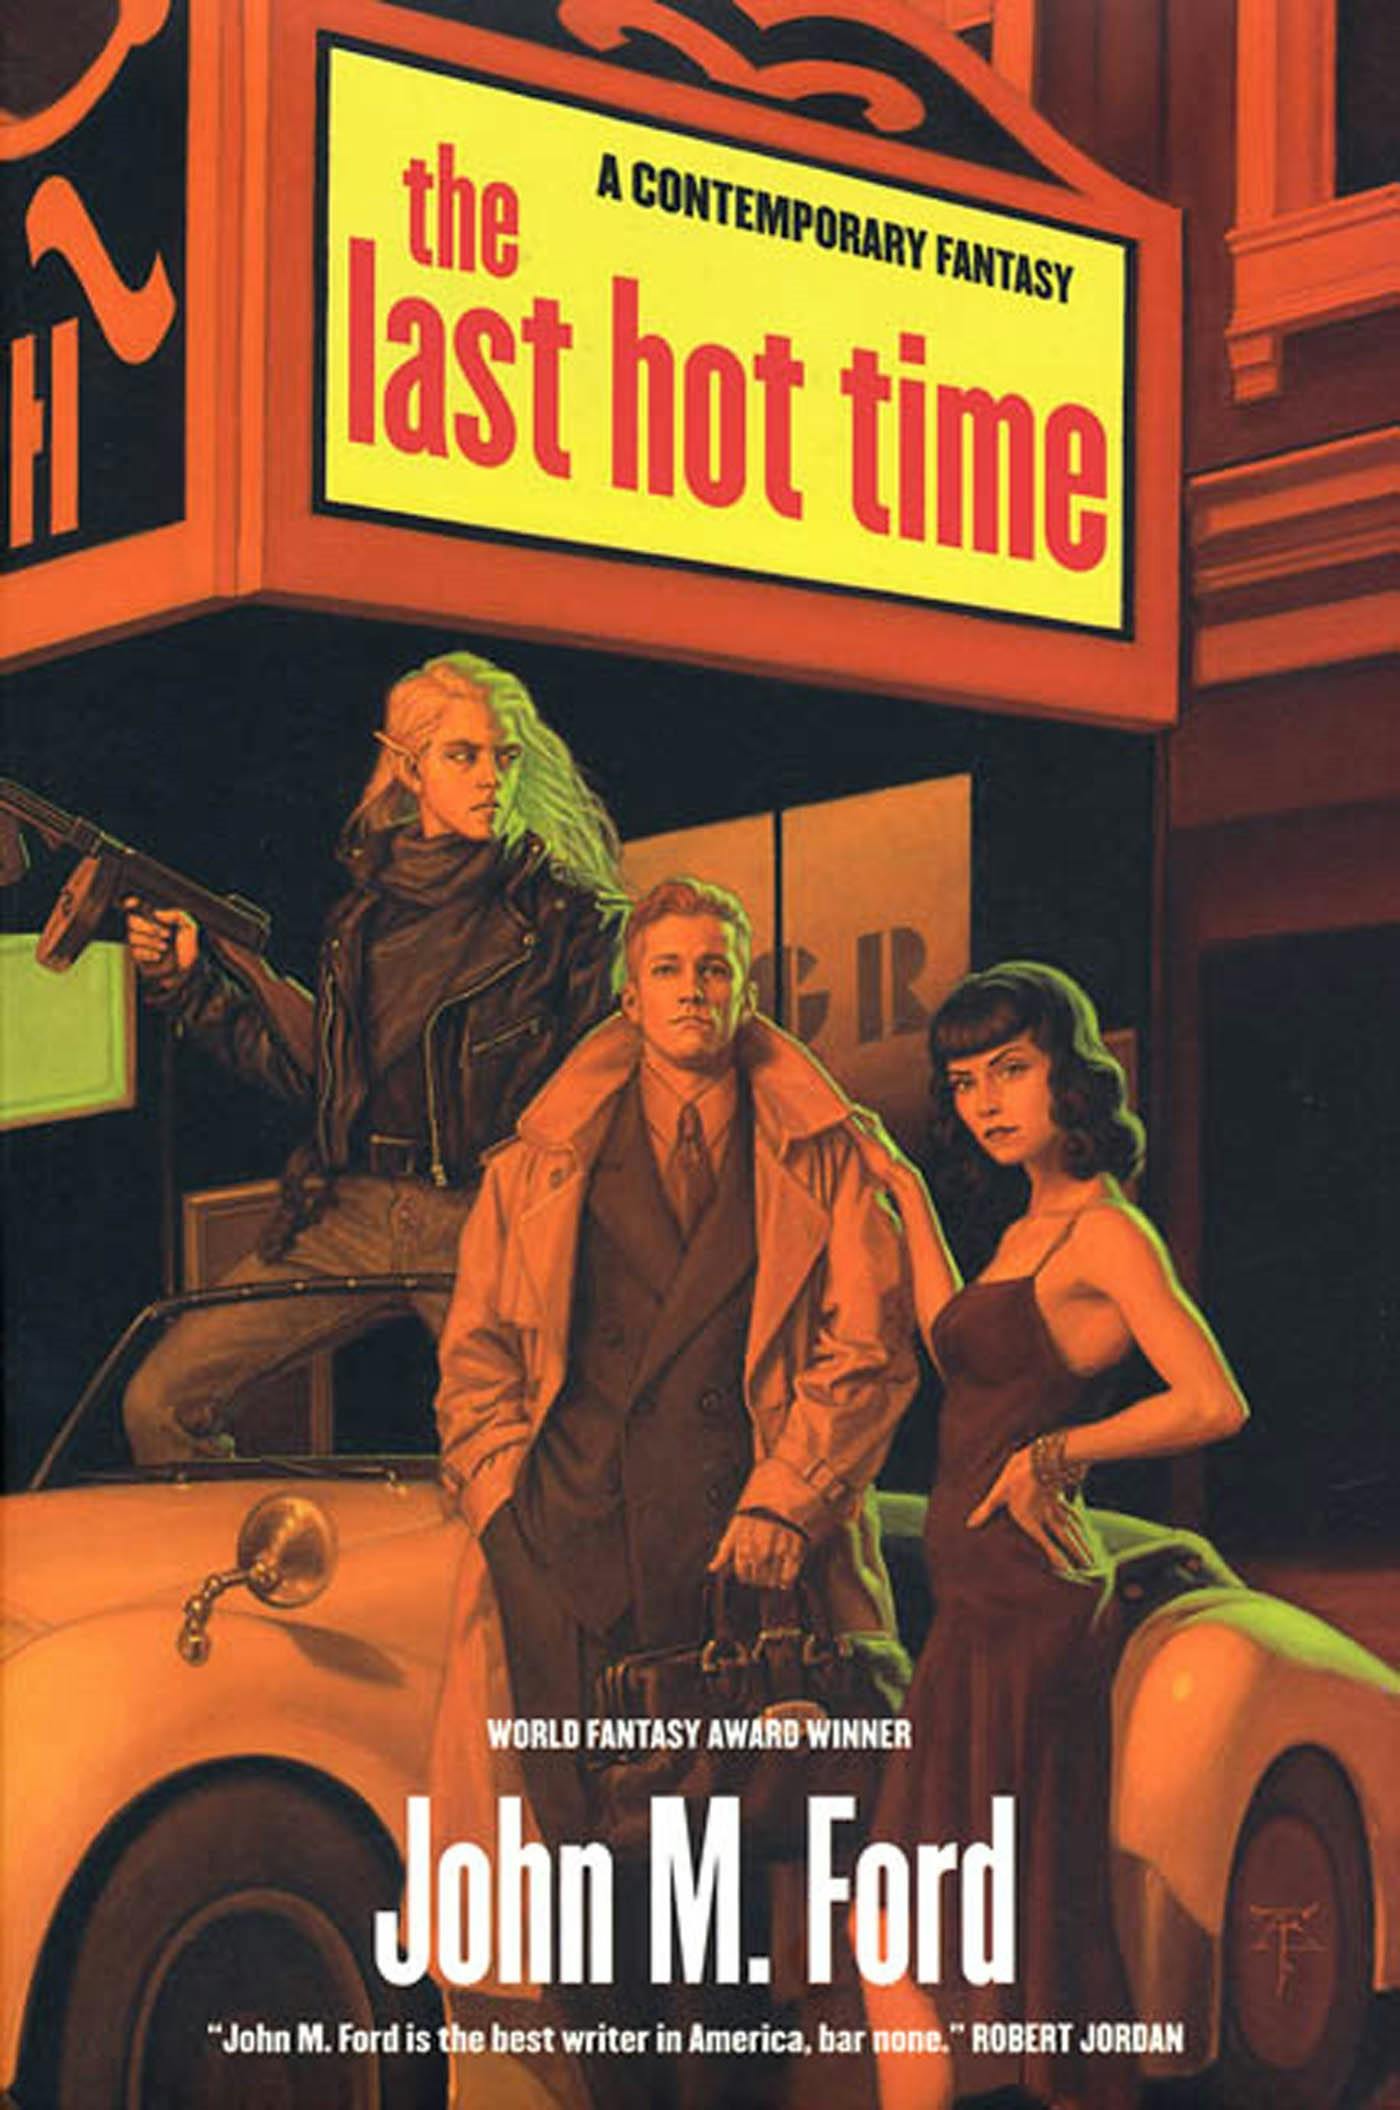 Cover for the book titled as: The Last Hot Time